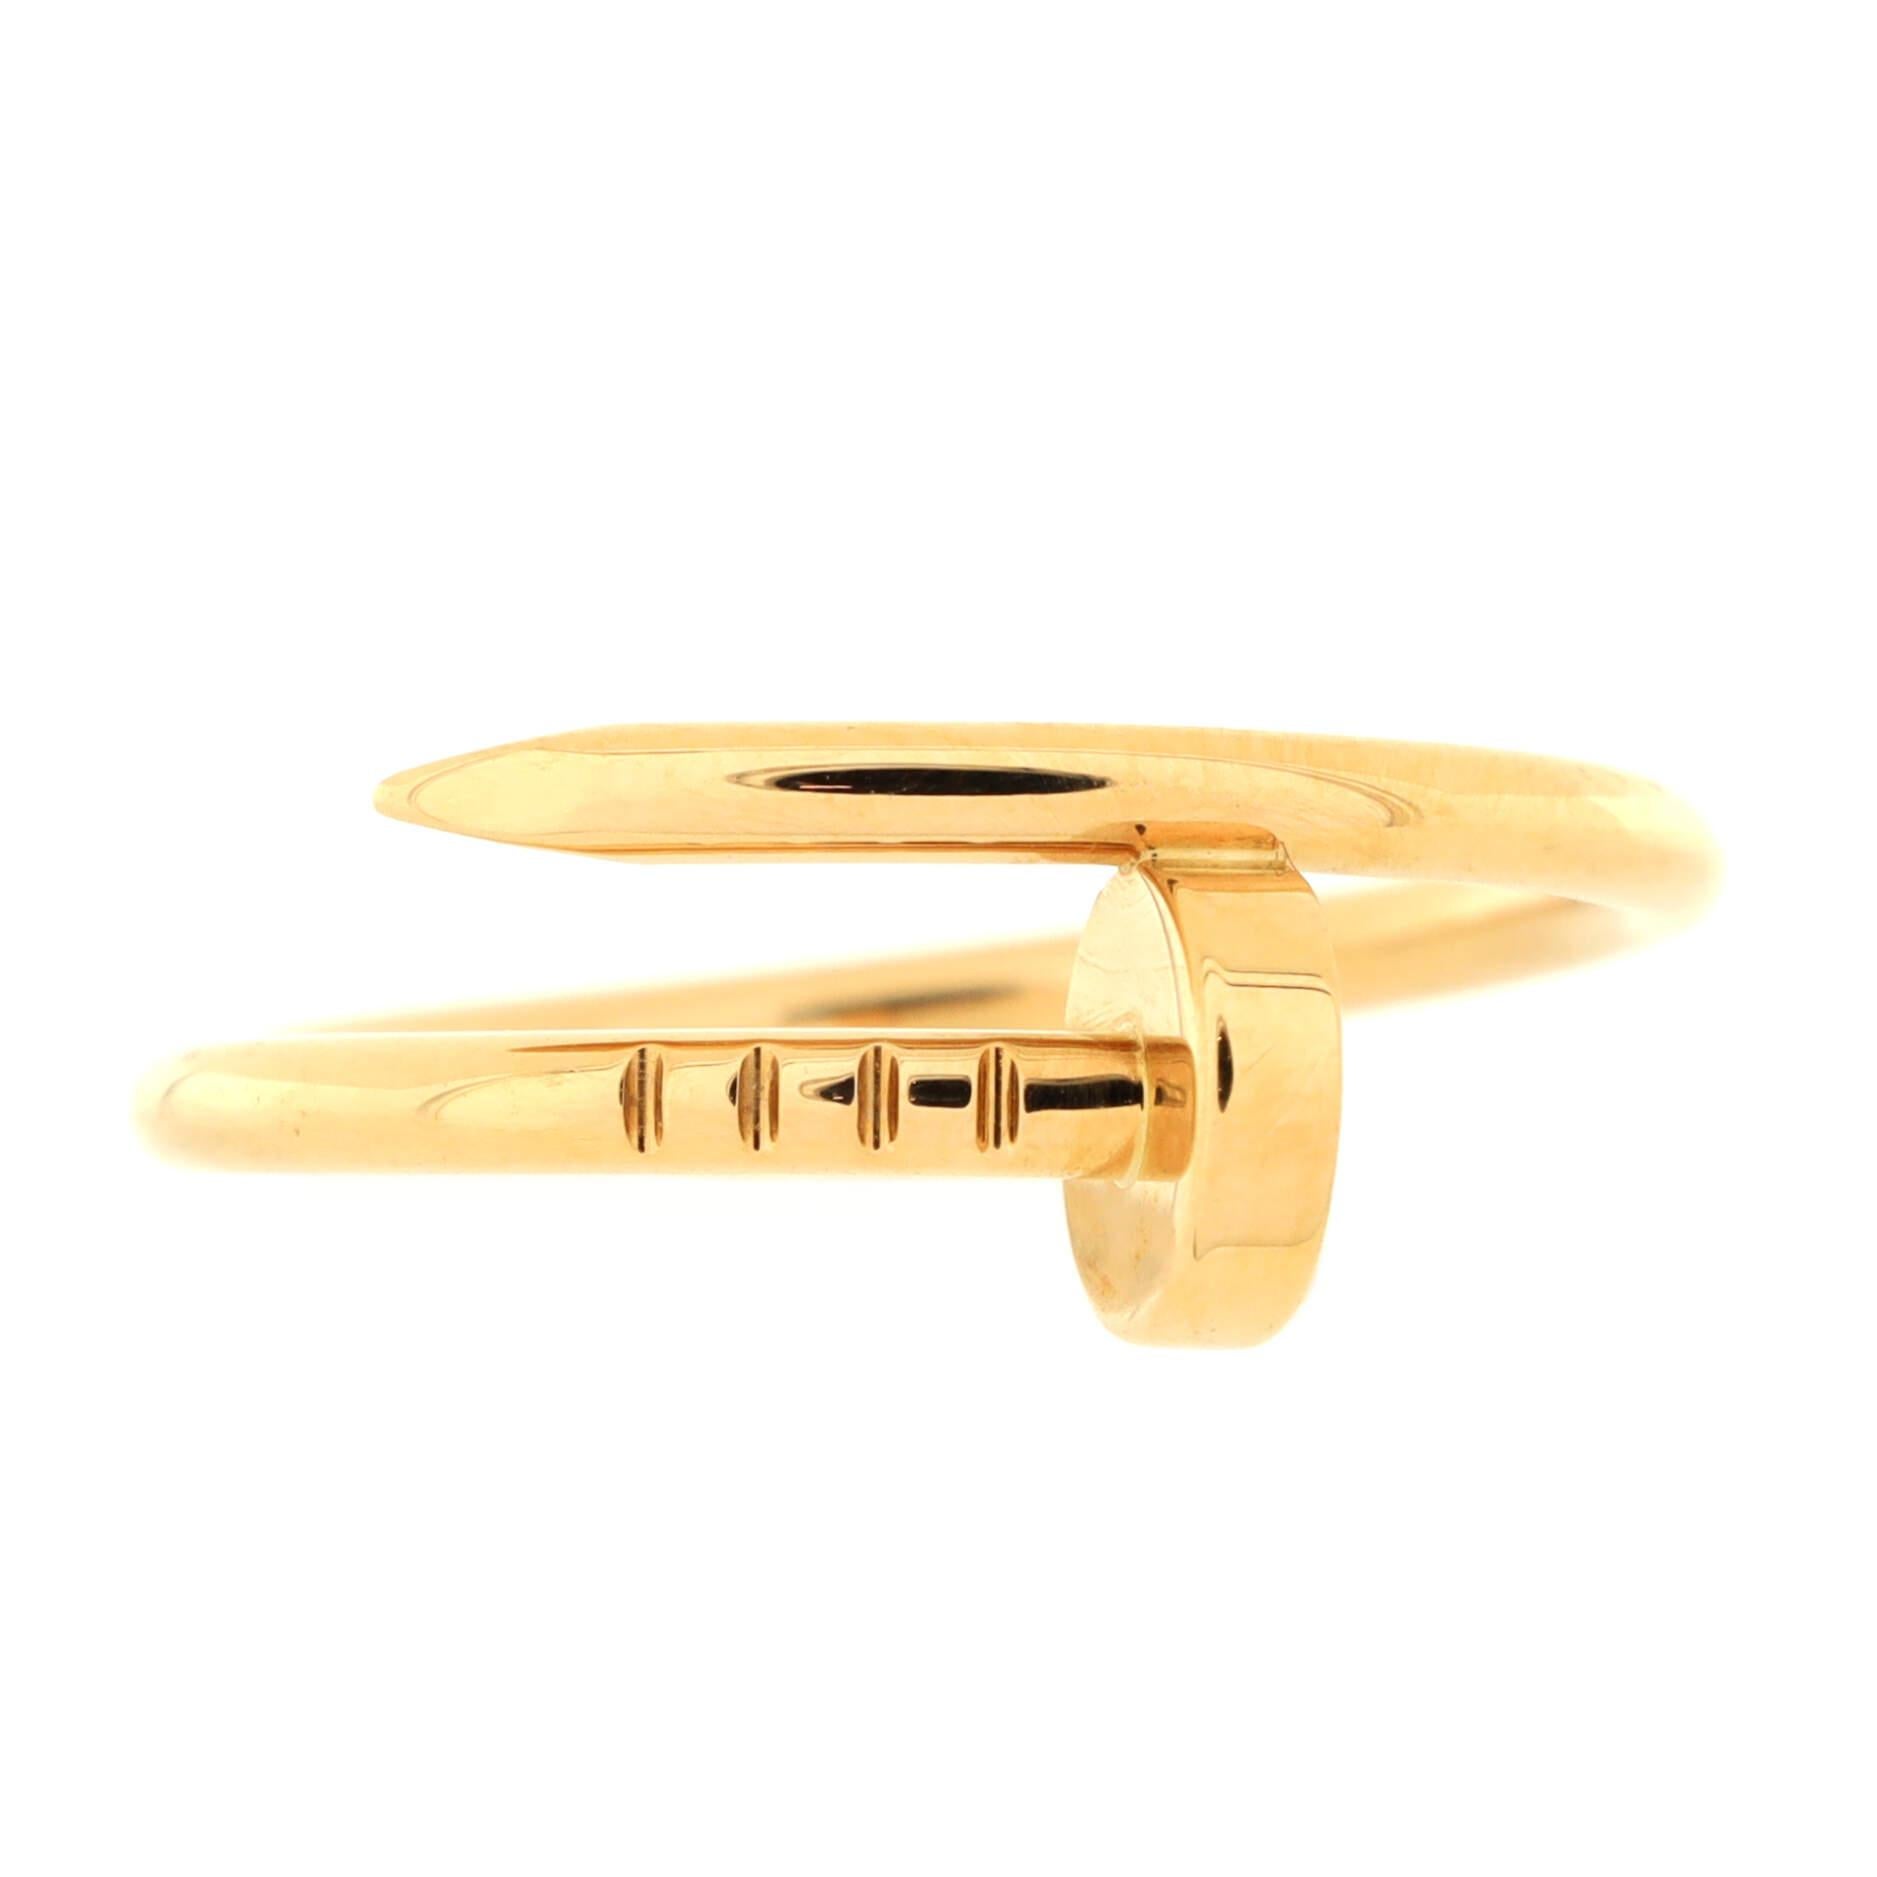 Condition: Excellent. Faint wear throughout.
Accessories: No Accessories
Measurements: Size: 6 - 52, Width: 1.80 mm
Designer: Cartier
Model: Juste un Clou Ring 18K Yellow Gold Small
Exterior Color: Yellow Gold
Item Number: 221053/1